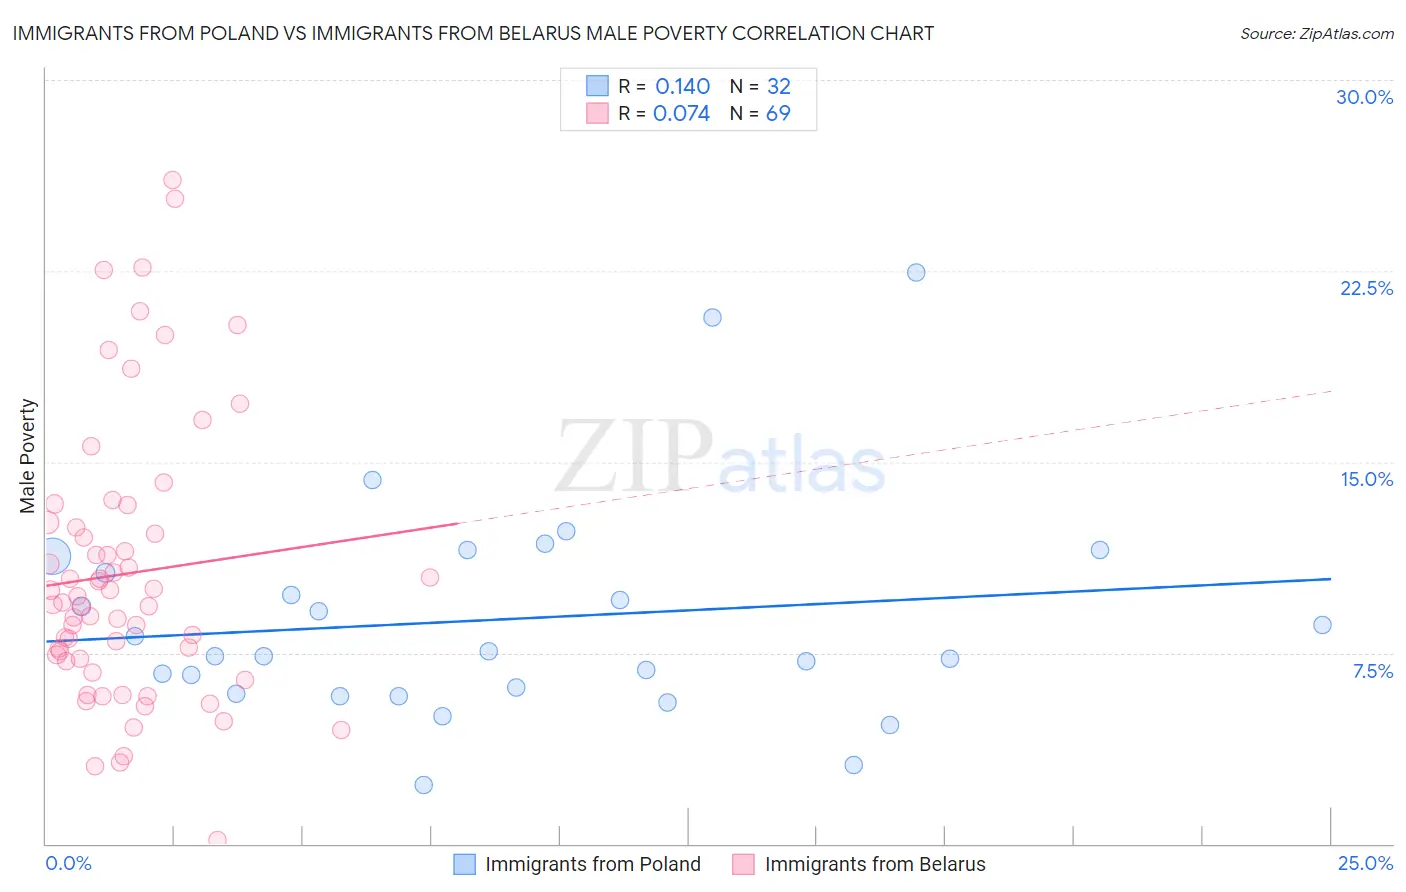 Immigrants from Poland vs Immigrants from Belarus Male Poverty